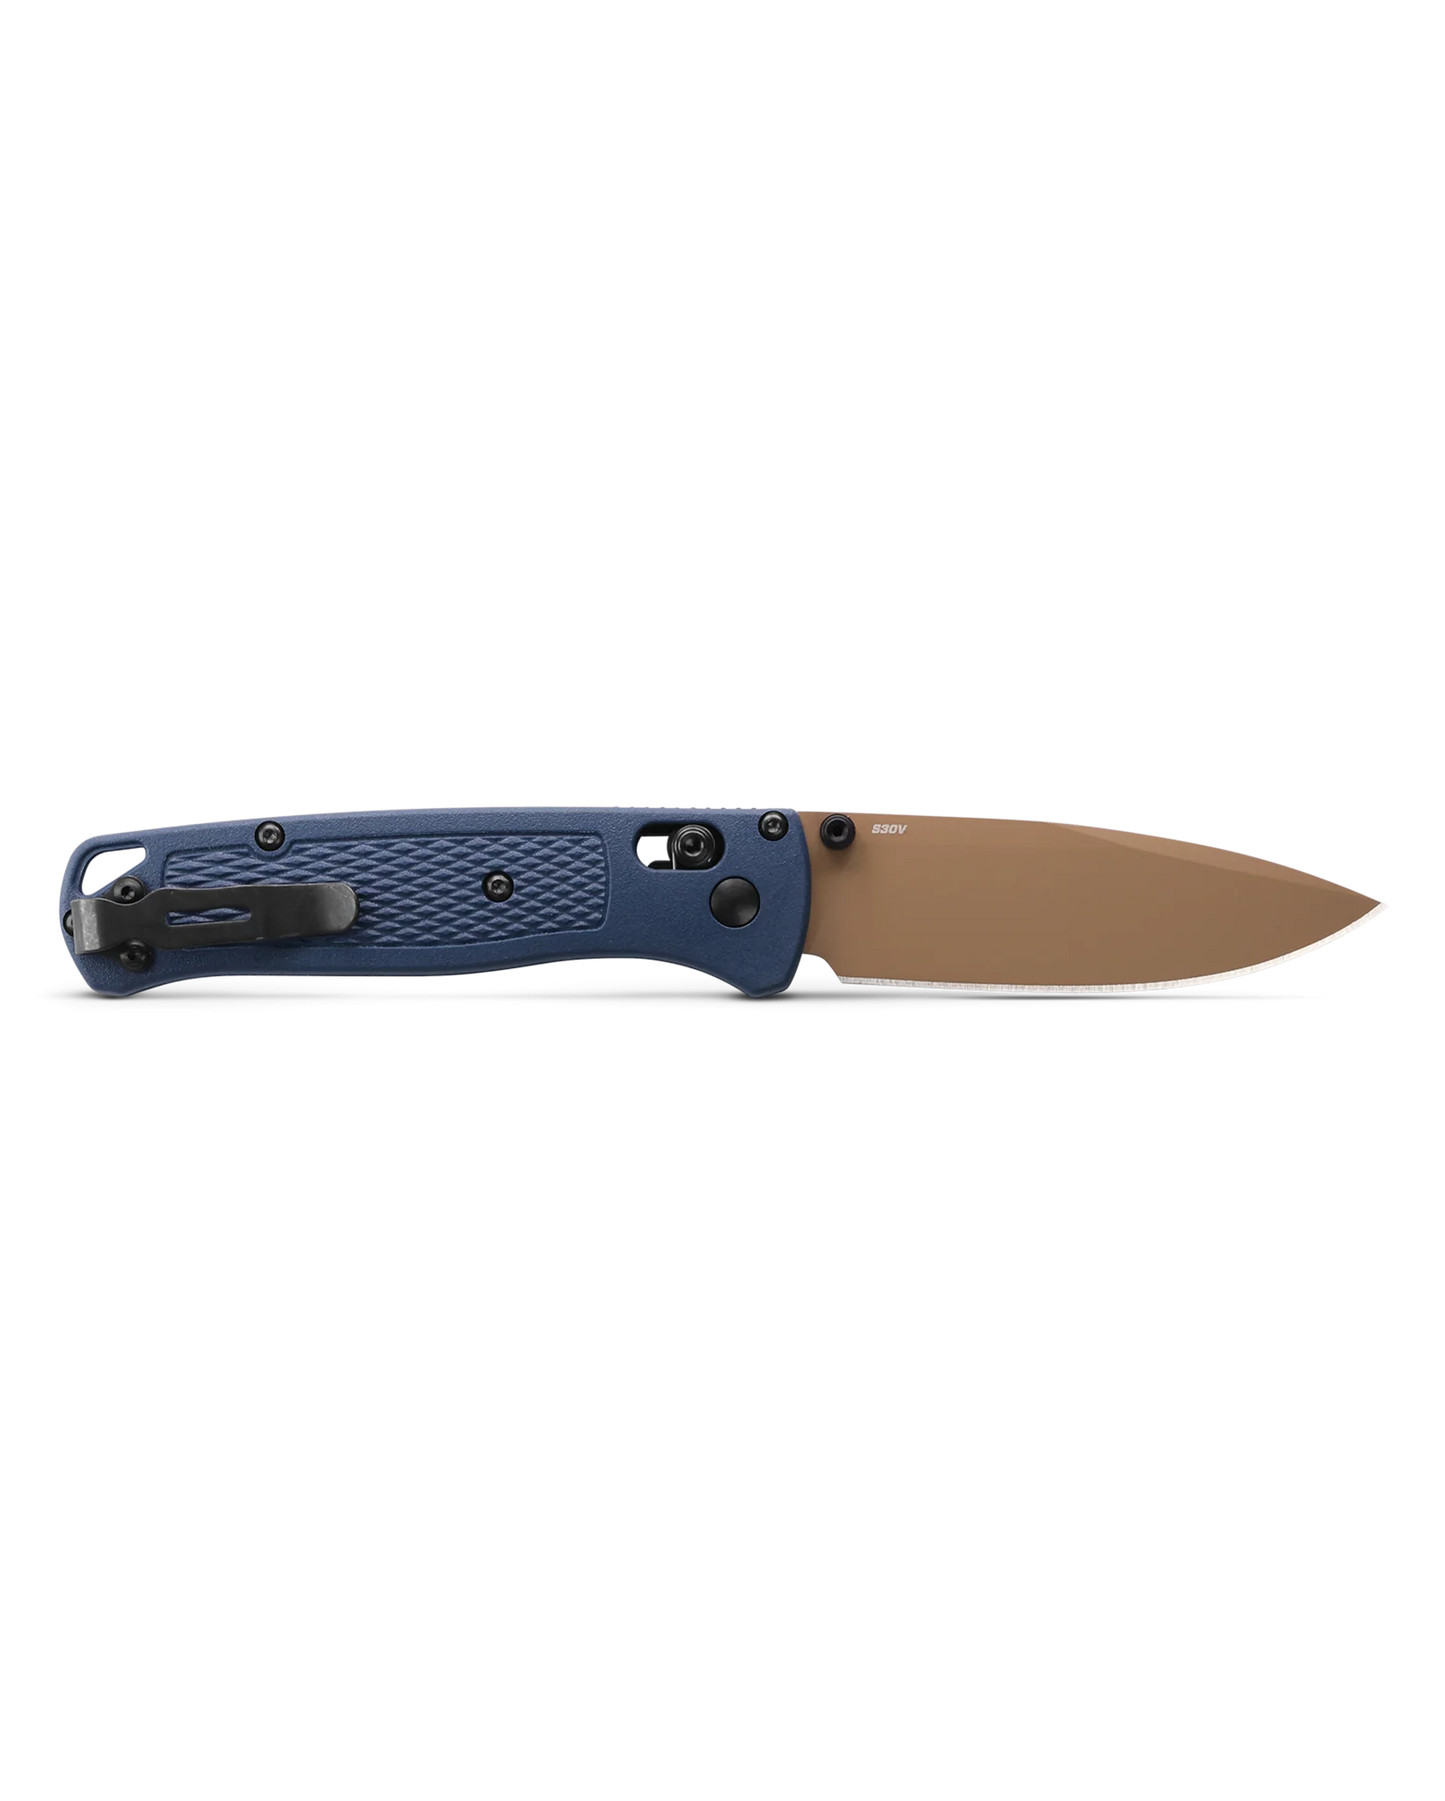 Benchmade 535FE-05 BUGOUT, Crater Blue Grivory, Axis EDC Taschenmesser